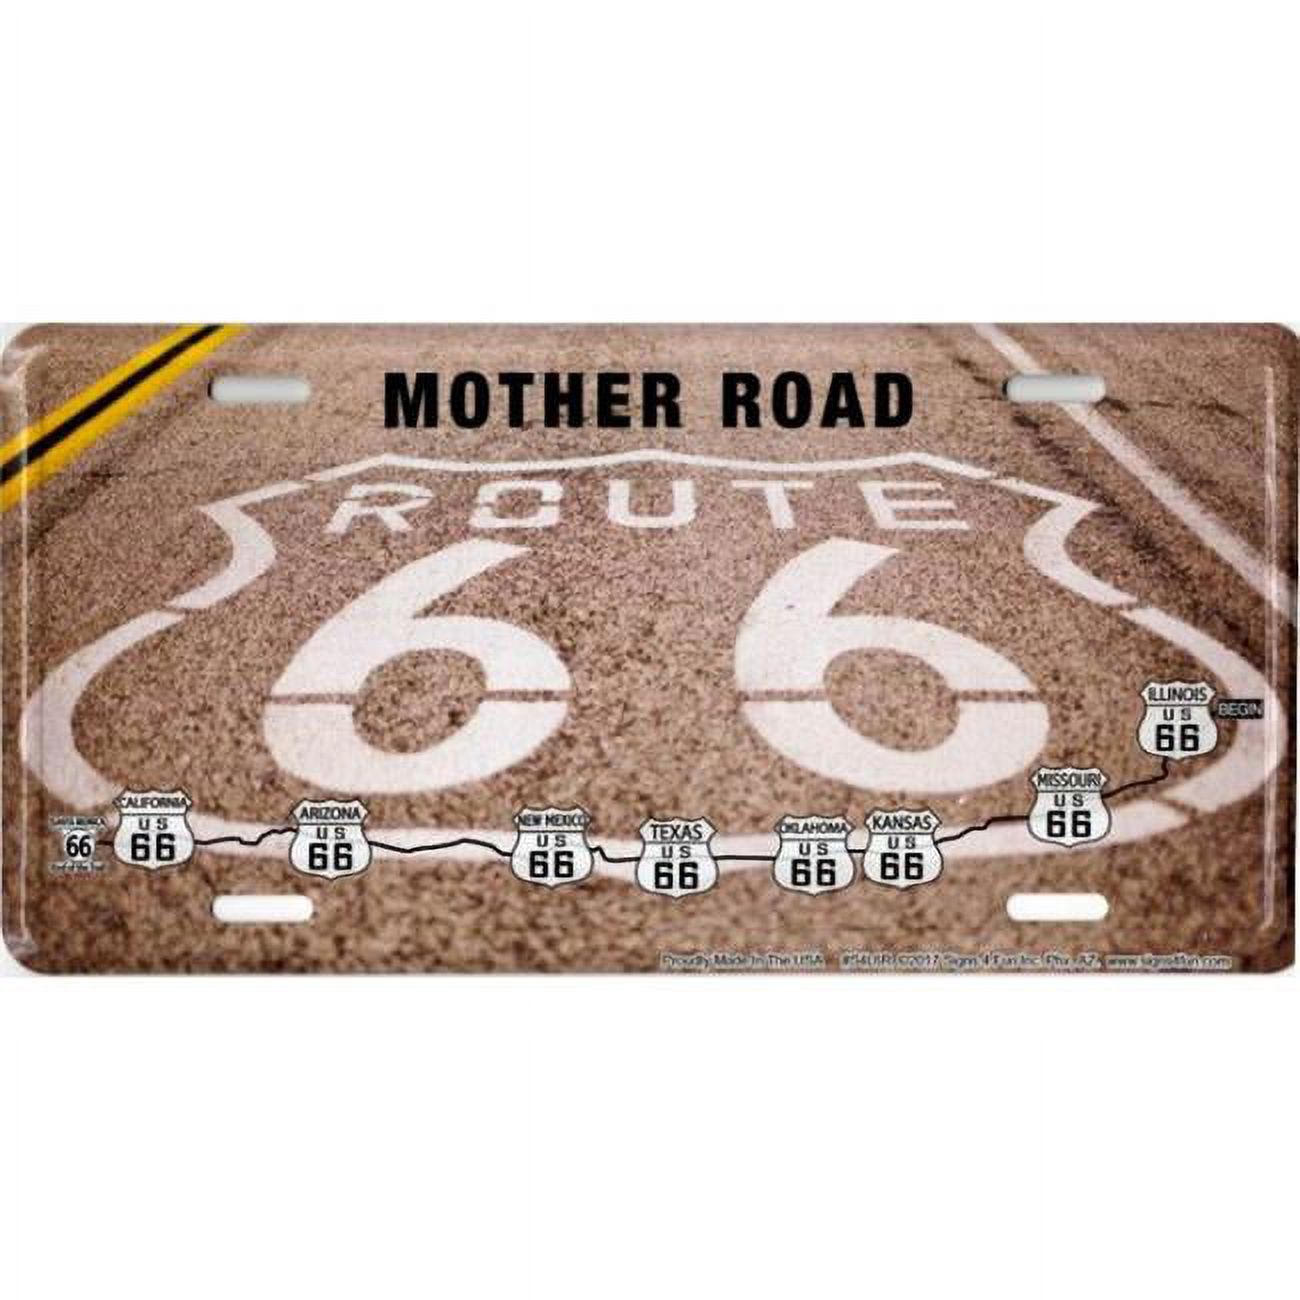 212 Main S4L6R 6 x 12 in. Route 66 Road Paint Metal License Plate - image 1 of 1